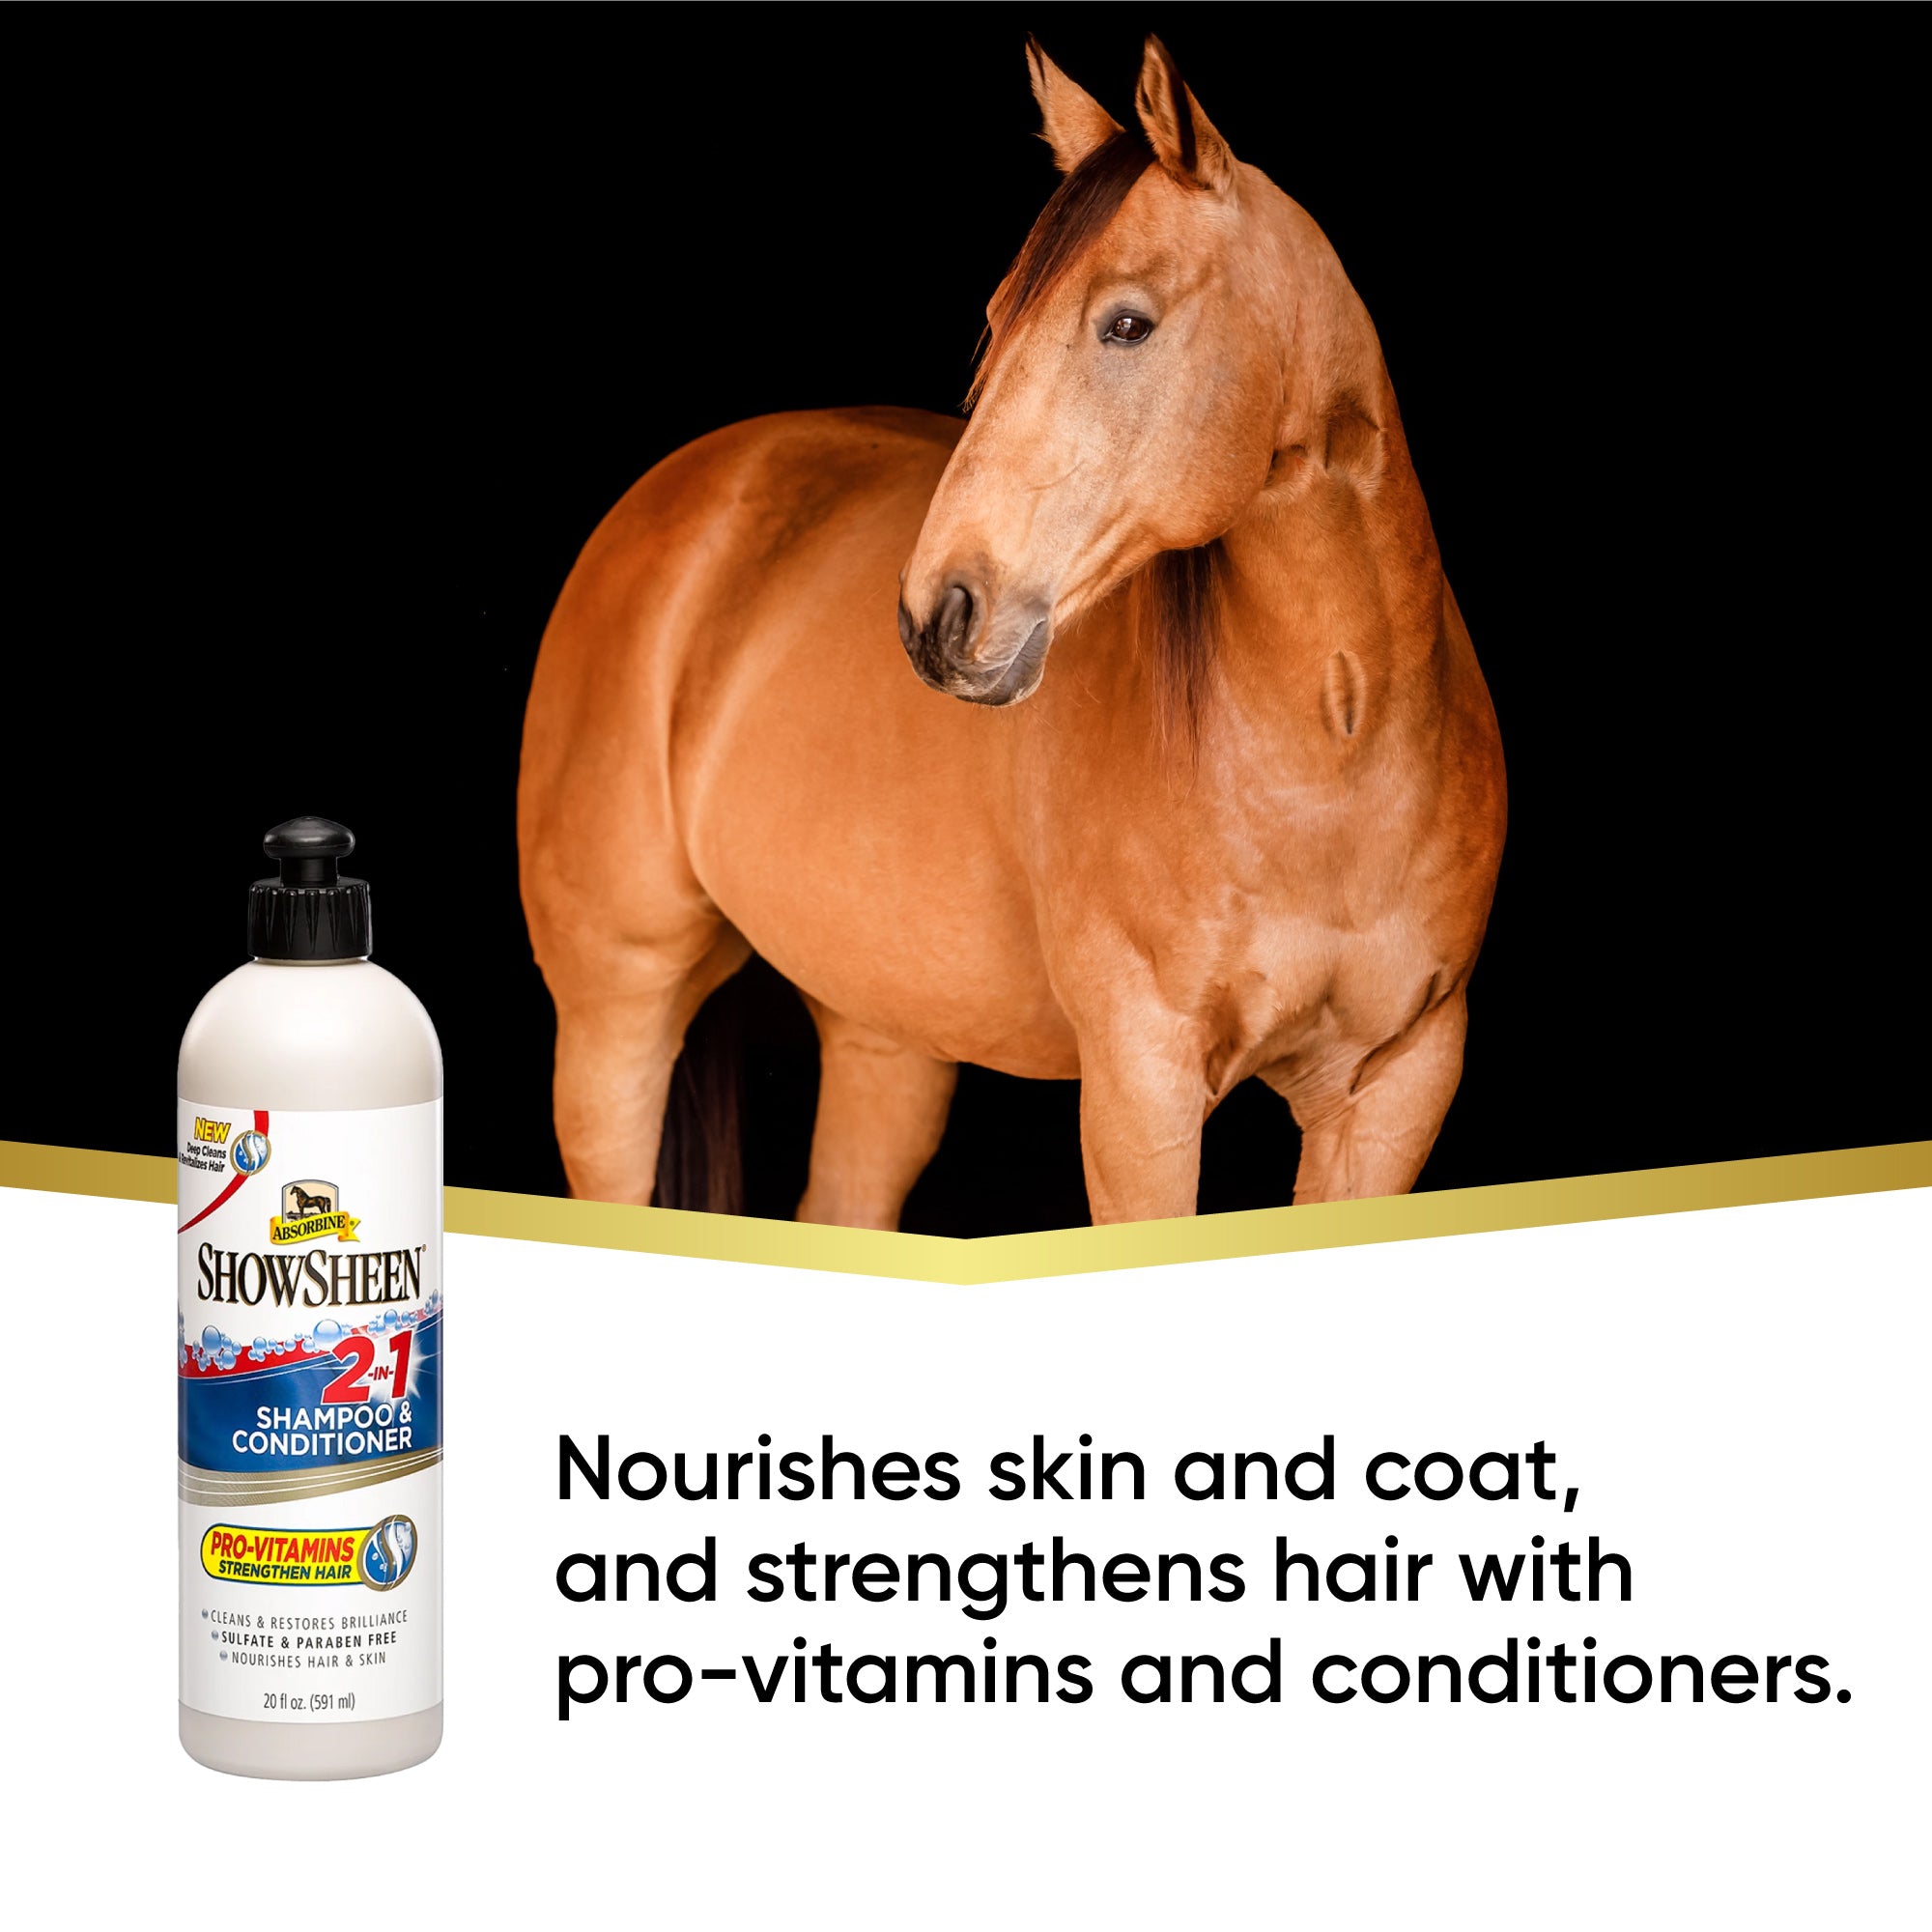 Brown horse standing in back of a bottle of Showsheen 2 in 1 Shampoo and Conditioner.  Nourishes skin and coat, and strengthens hair with pro-vitamins and conditioners.